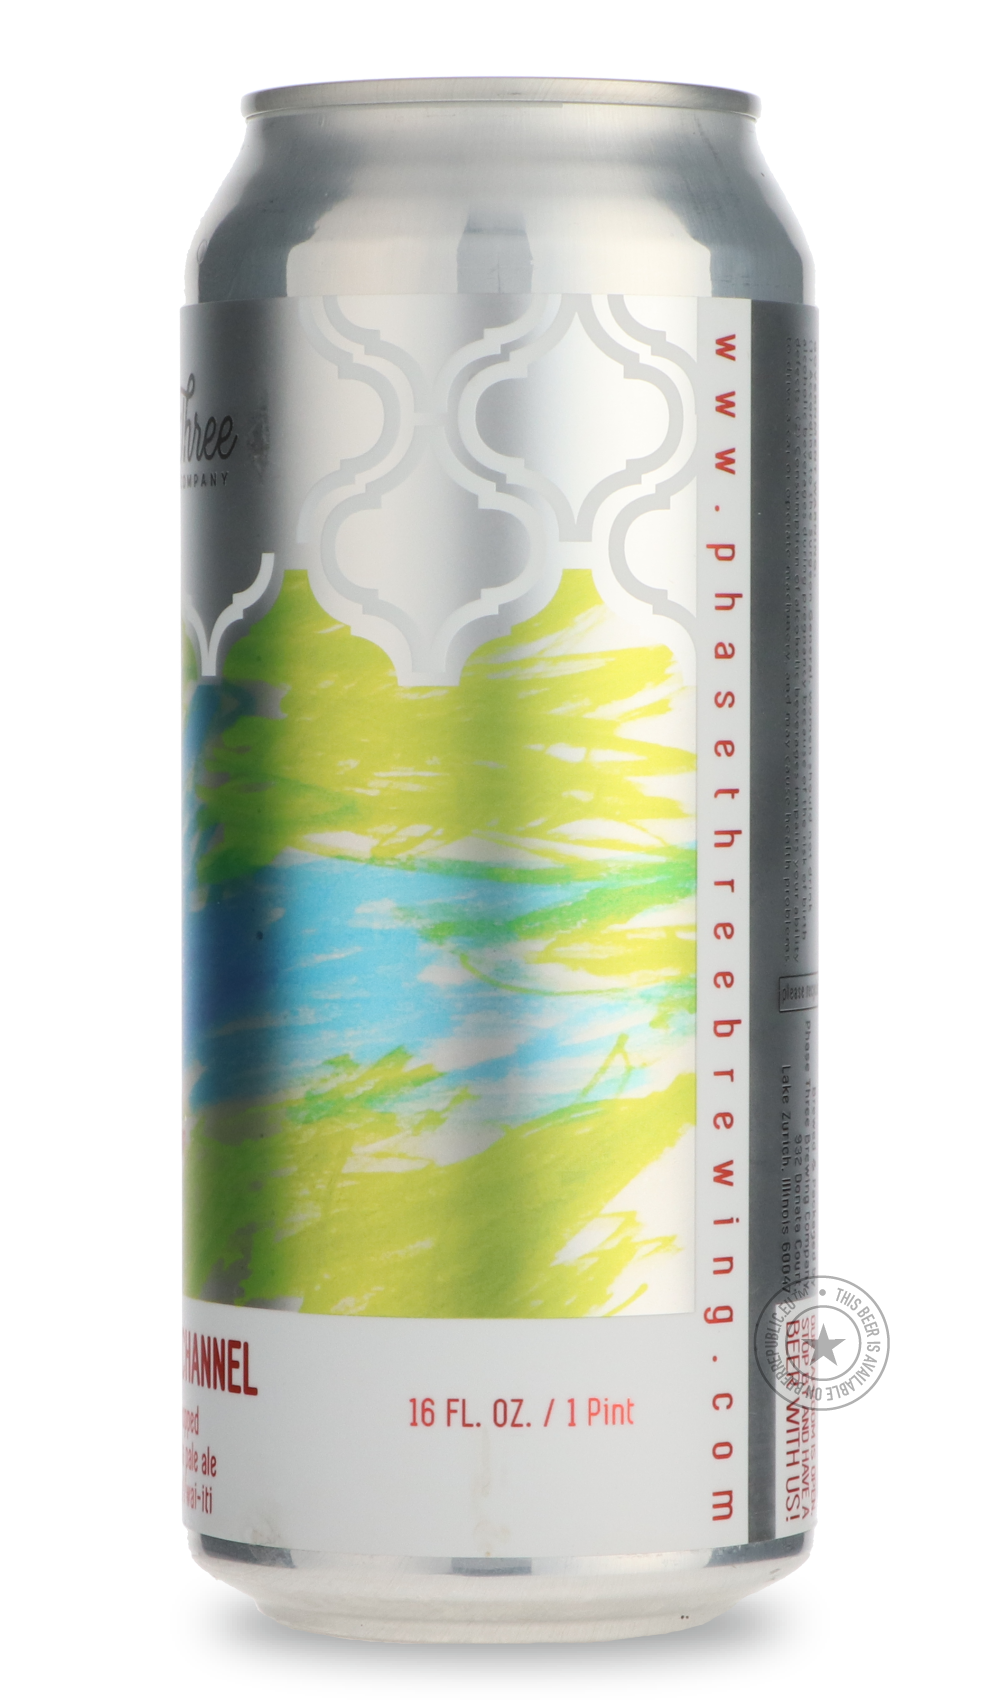 -Phase Three- DDH Color Channel-IPA- Only @ Beer Republic - The best online beer store for American & Canadian craft beer - Buy beer online from the USA and Canada - Bier online kopen - Amerikaans bier kopen - Craft beer store - Craft beer kopen - Amerikanisch bier kaufen - Bier online kaufen - Acheter biere online - IPA - Stout - Porter - New England IPA - Hazy IPA - Imperial Stout - Barrel Aged - Barrel Aged Imperial Stout - Brown - Dark beer - Blond - Blonde - Pilsner - Lager - Wheat - Weizen - Amber - B